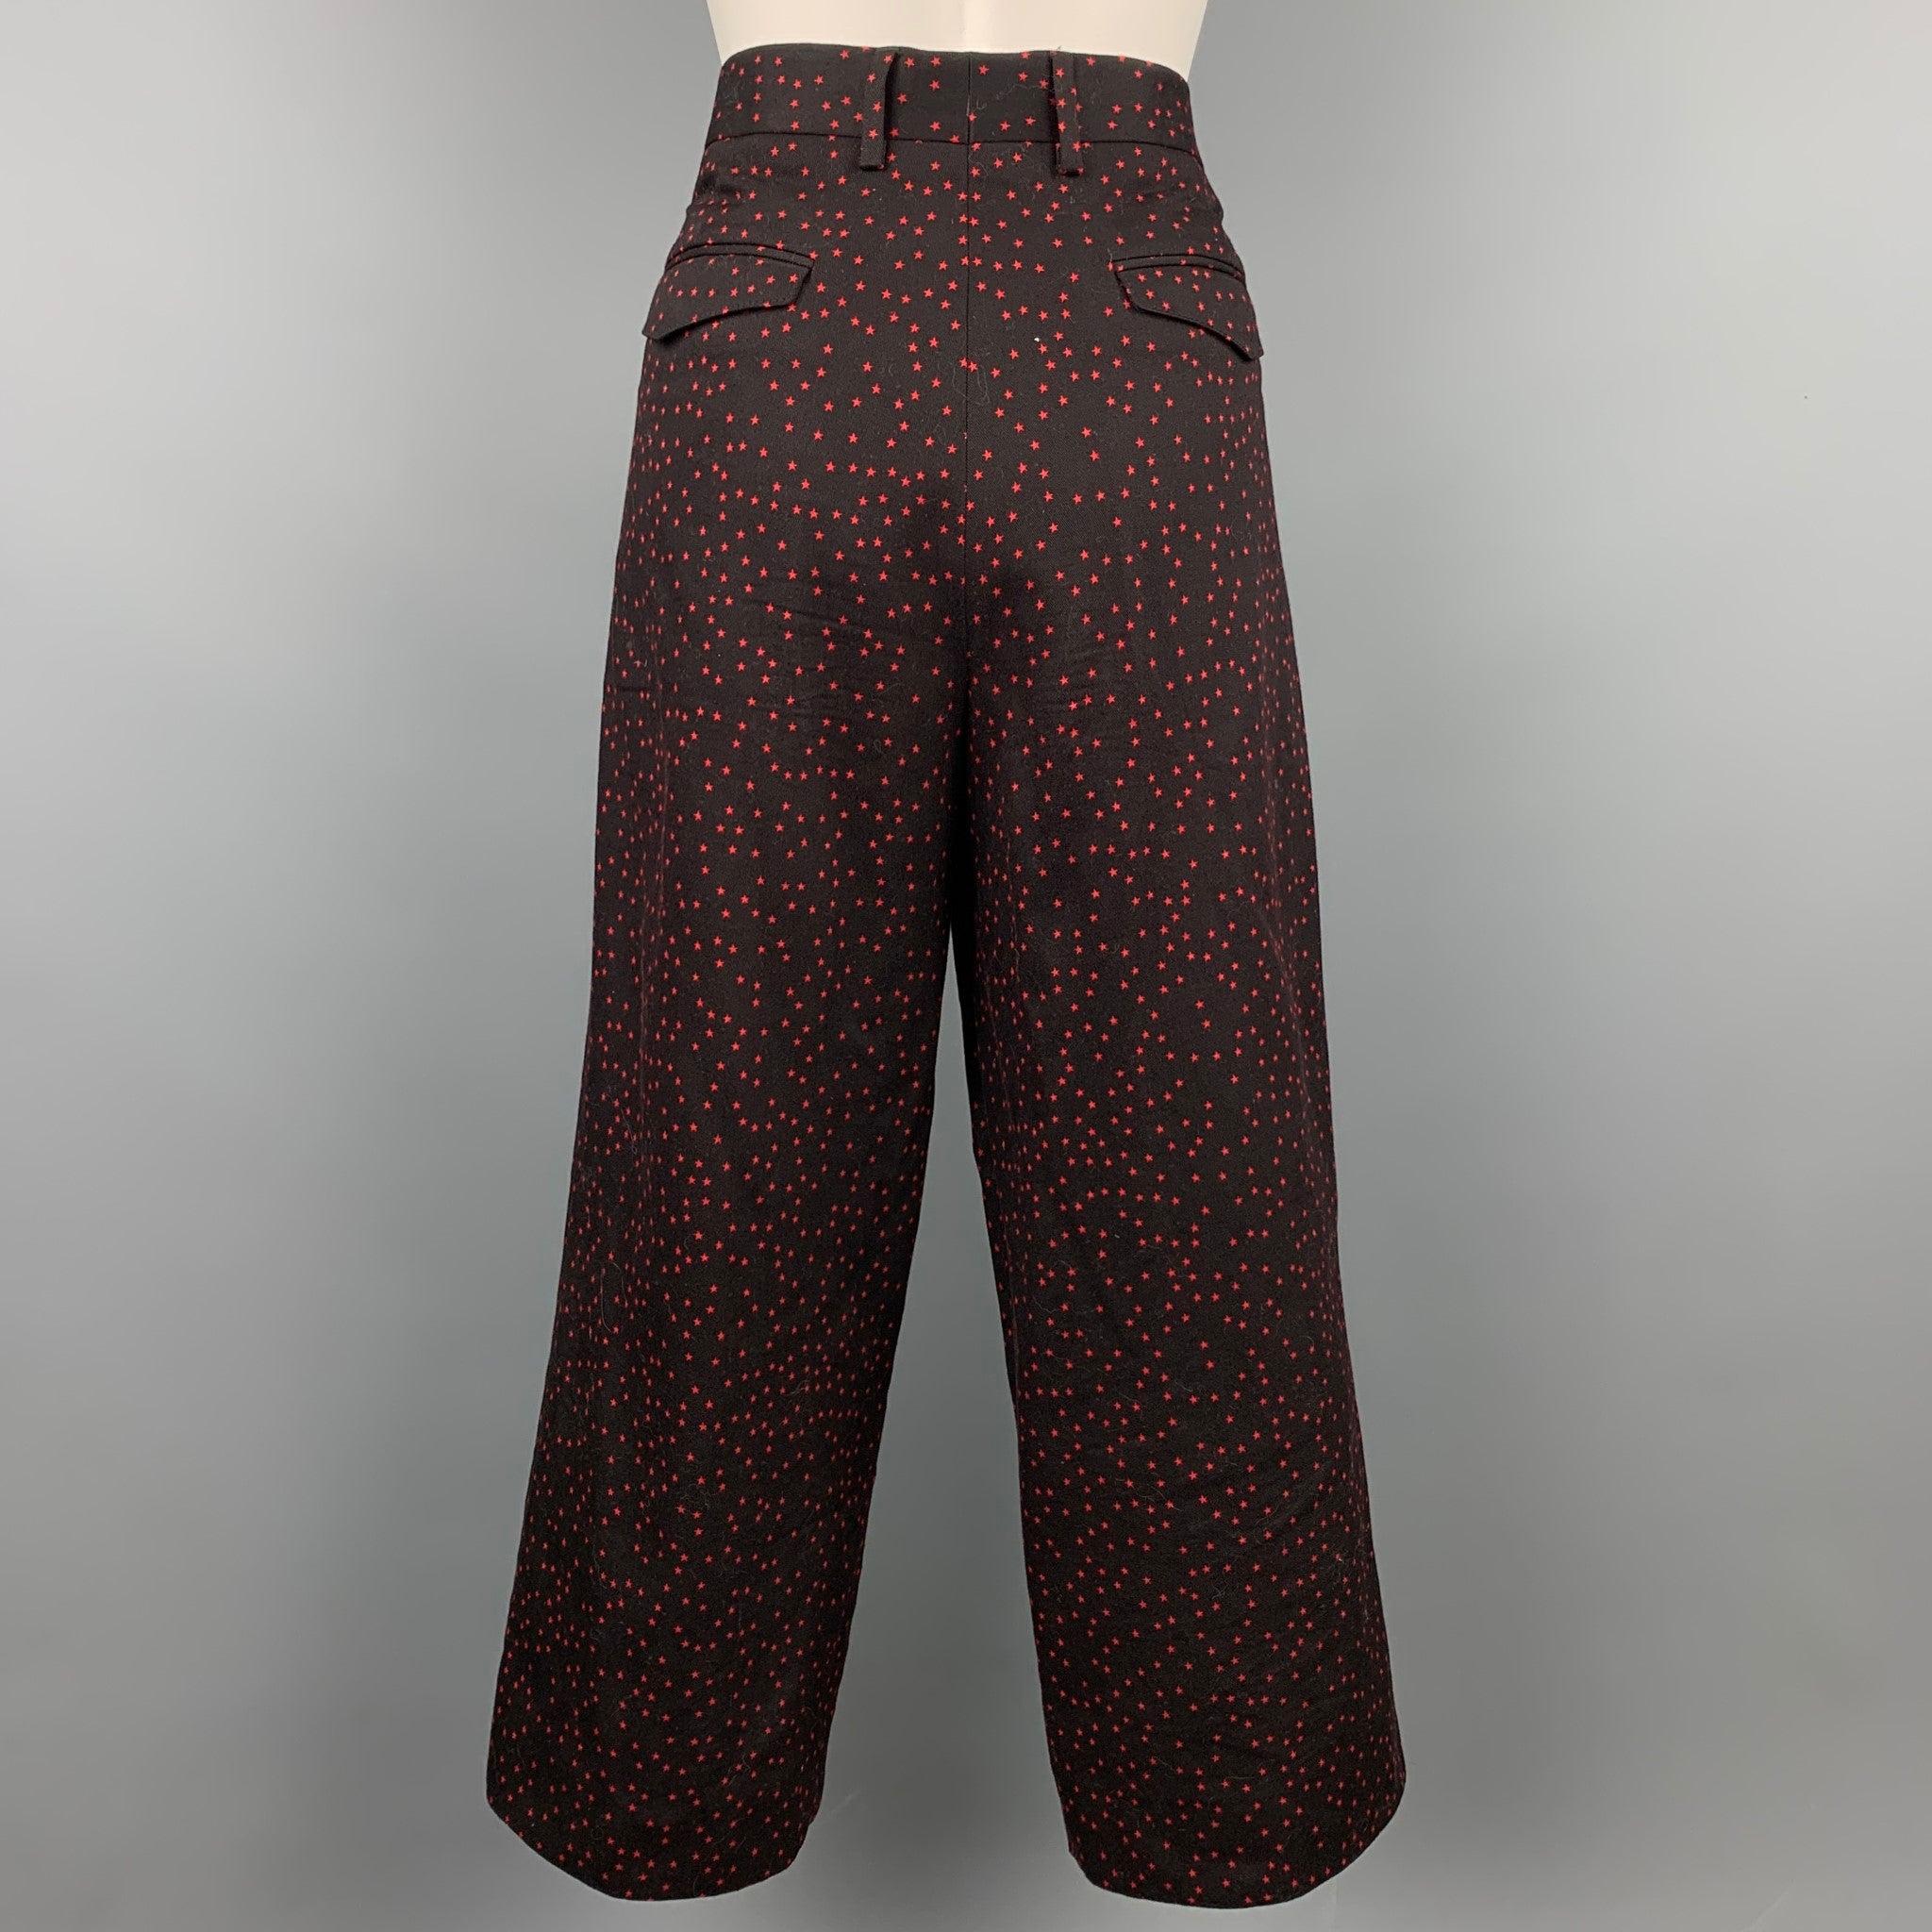 DRIES VAN NOTEN Size 6 Black & Red Star Print Cotton Wide Leg Dress Pants In Good Condition For Sale In San Francisco, CA